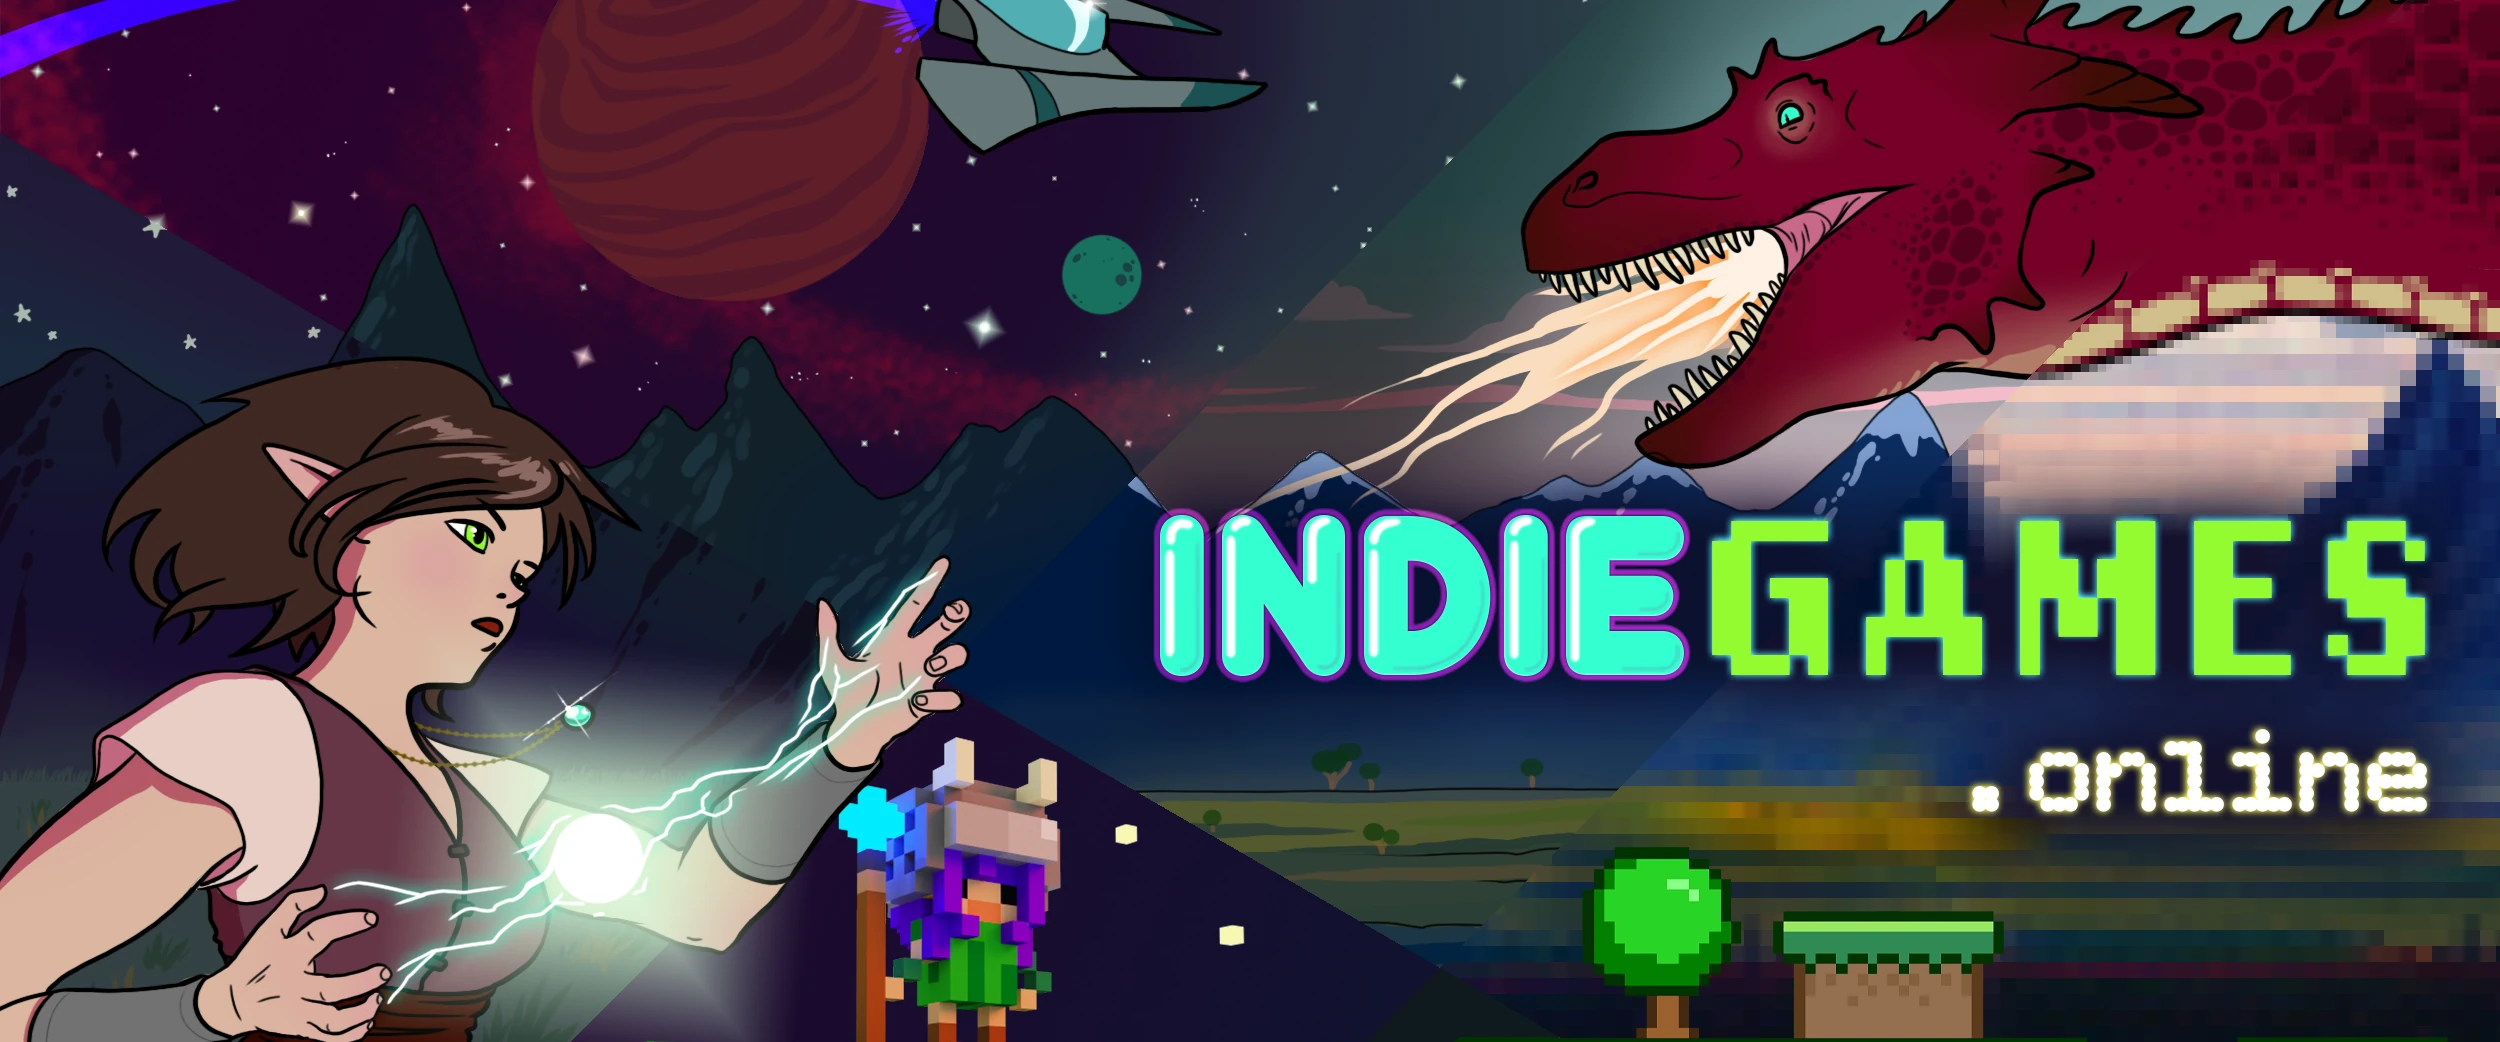 collage image in various styles with indiegames.online logo. an elf character in the bottom left, casts a spell and faces off against a fire breathing dragon in the opposite corner, along the top is a spaceship flying through space, and along the bottom stands a voxel character with a staff, standing on a pixelated platform